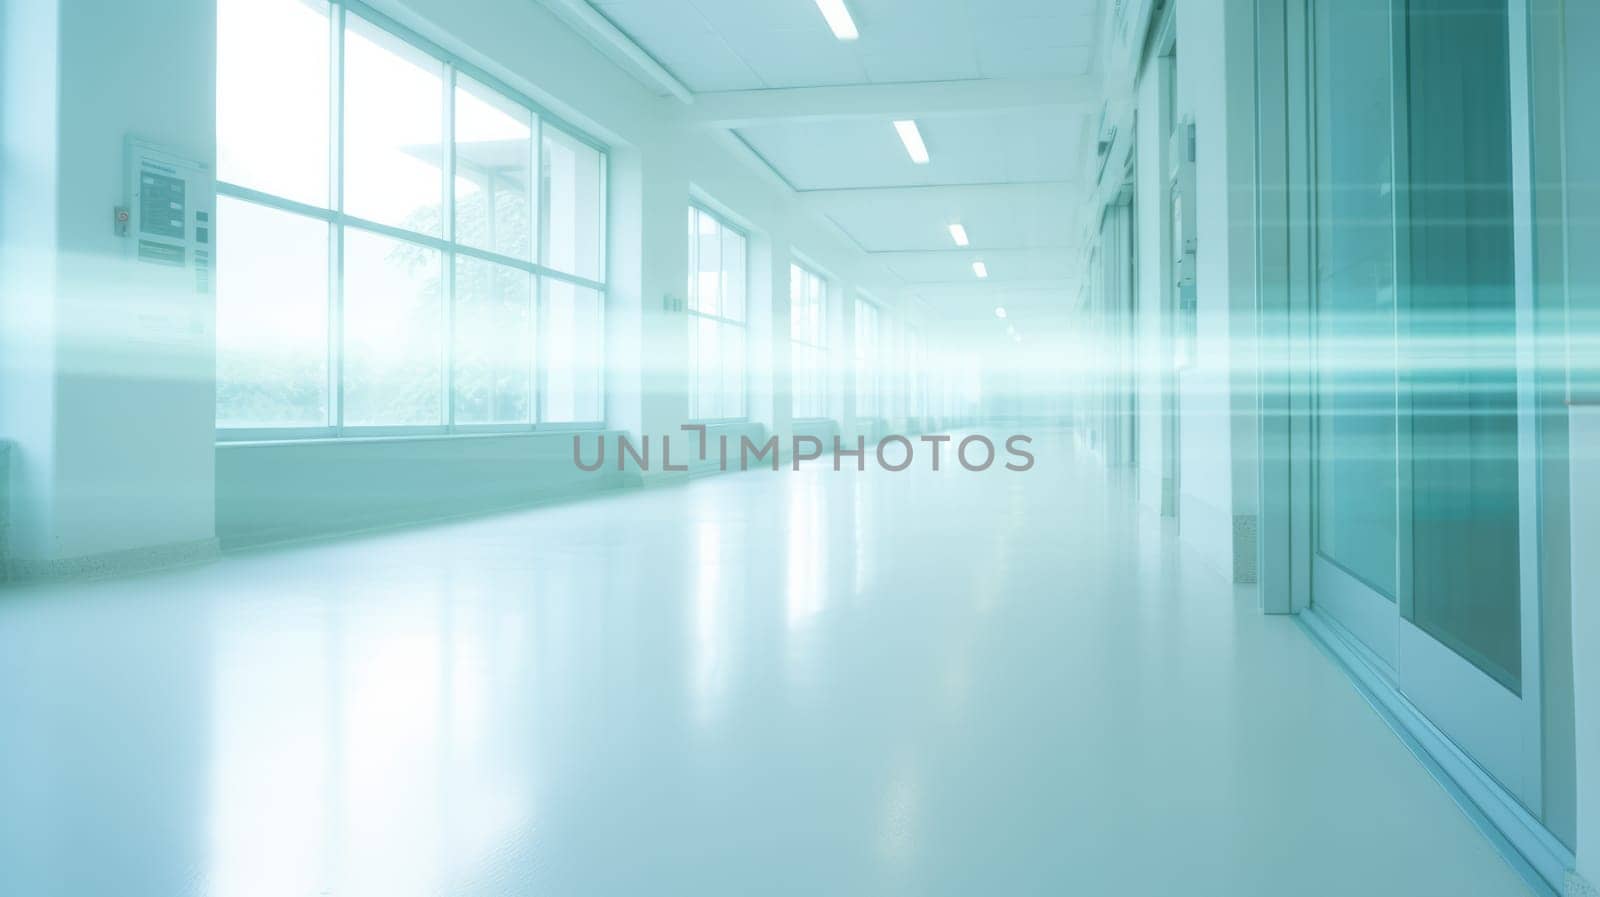 Blur image background of corridor in hospital or clinic. Modern hospital interior, medical and healthcare concept AI